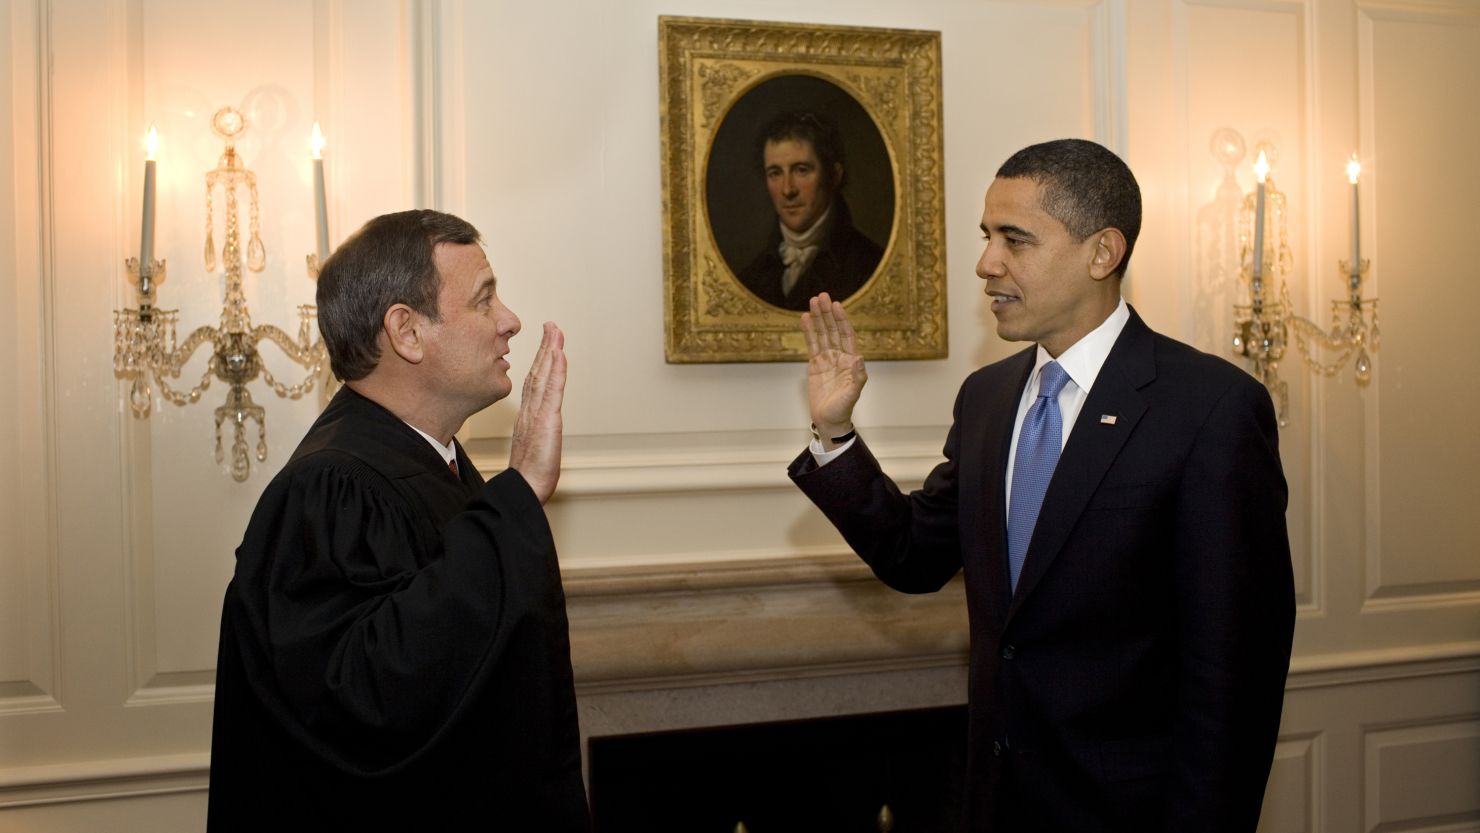 Chief Justice John Roberts re-administers the oath of office to Barack Obama at the White House on January 21, 2009. 